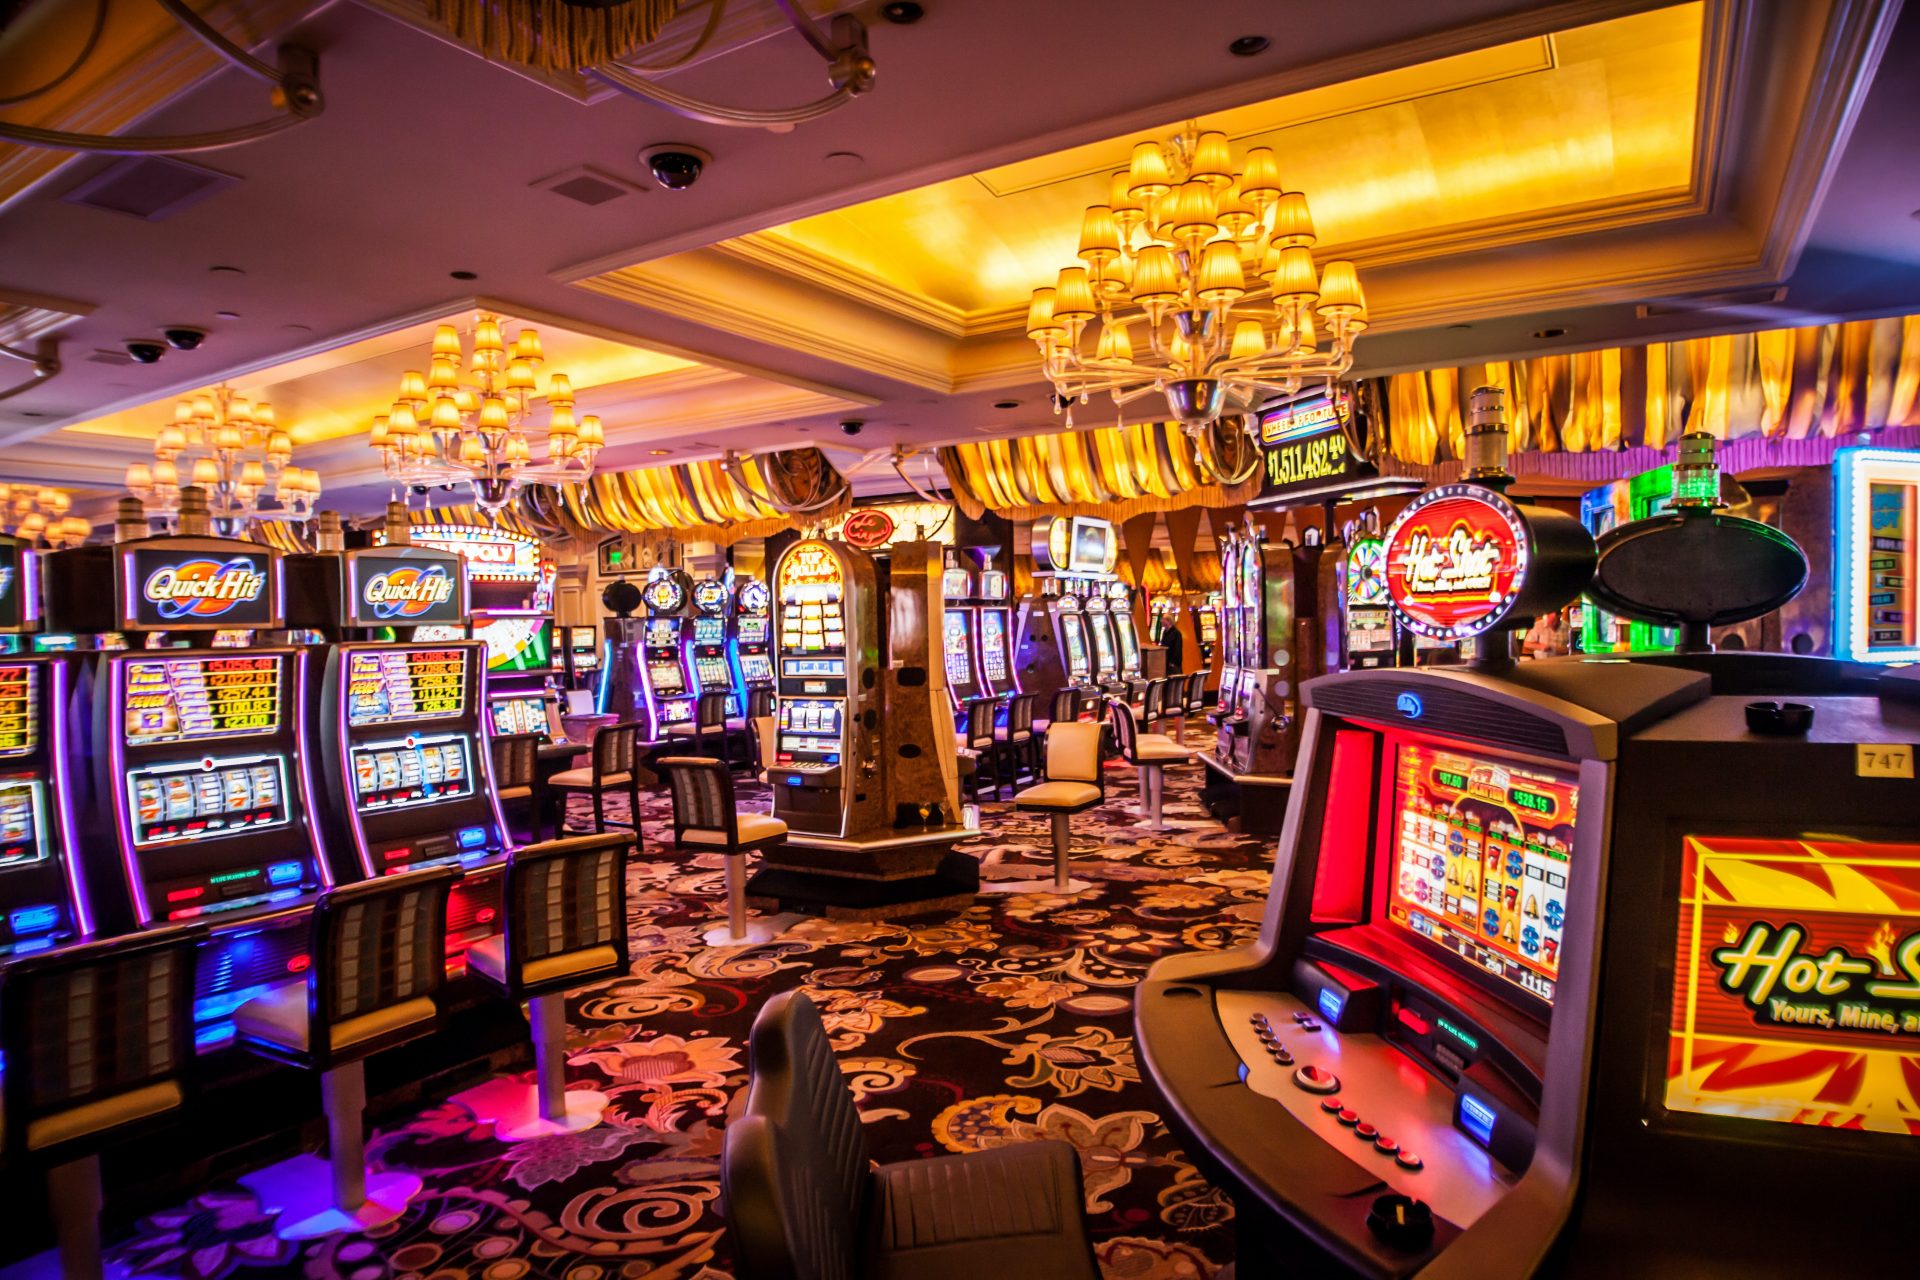 3 Ways Twitter Destroyed My Slots Online Without Me Noticing